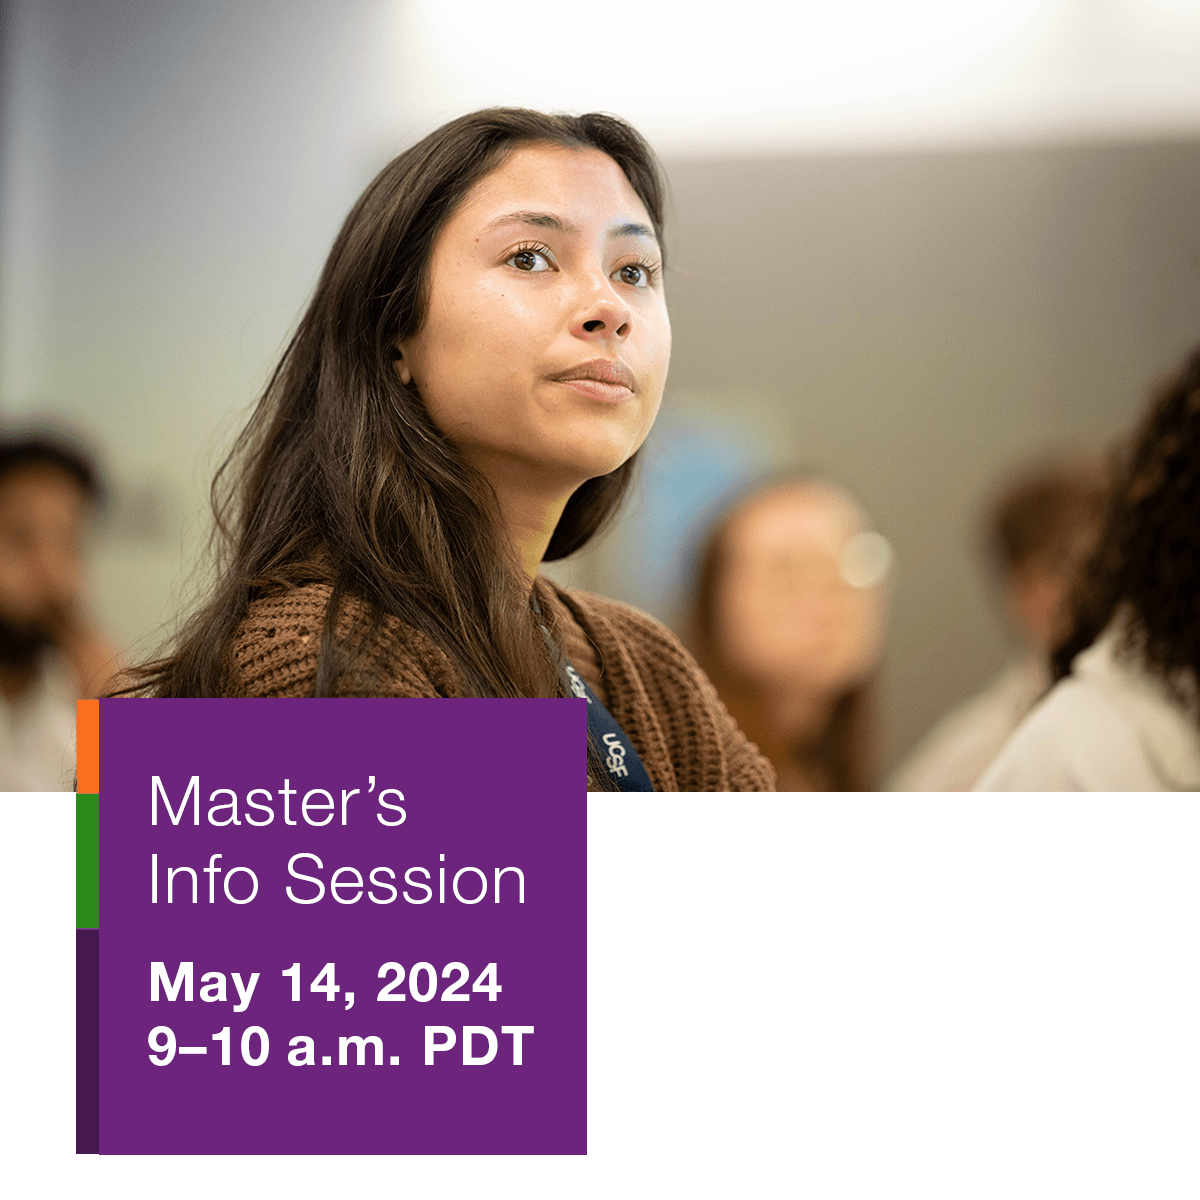 Master's Info Session on May 14th from 9 to 10 a.m. PDT